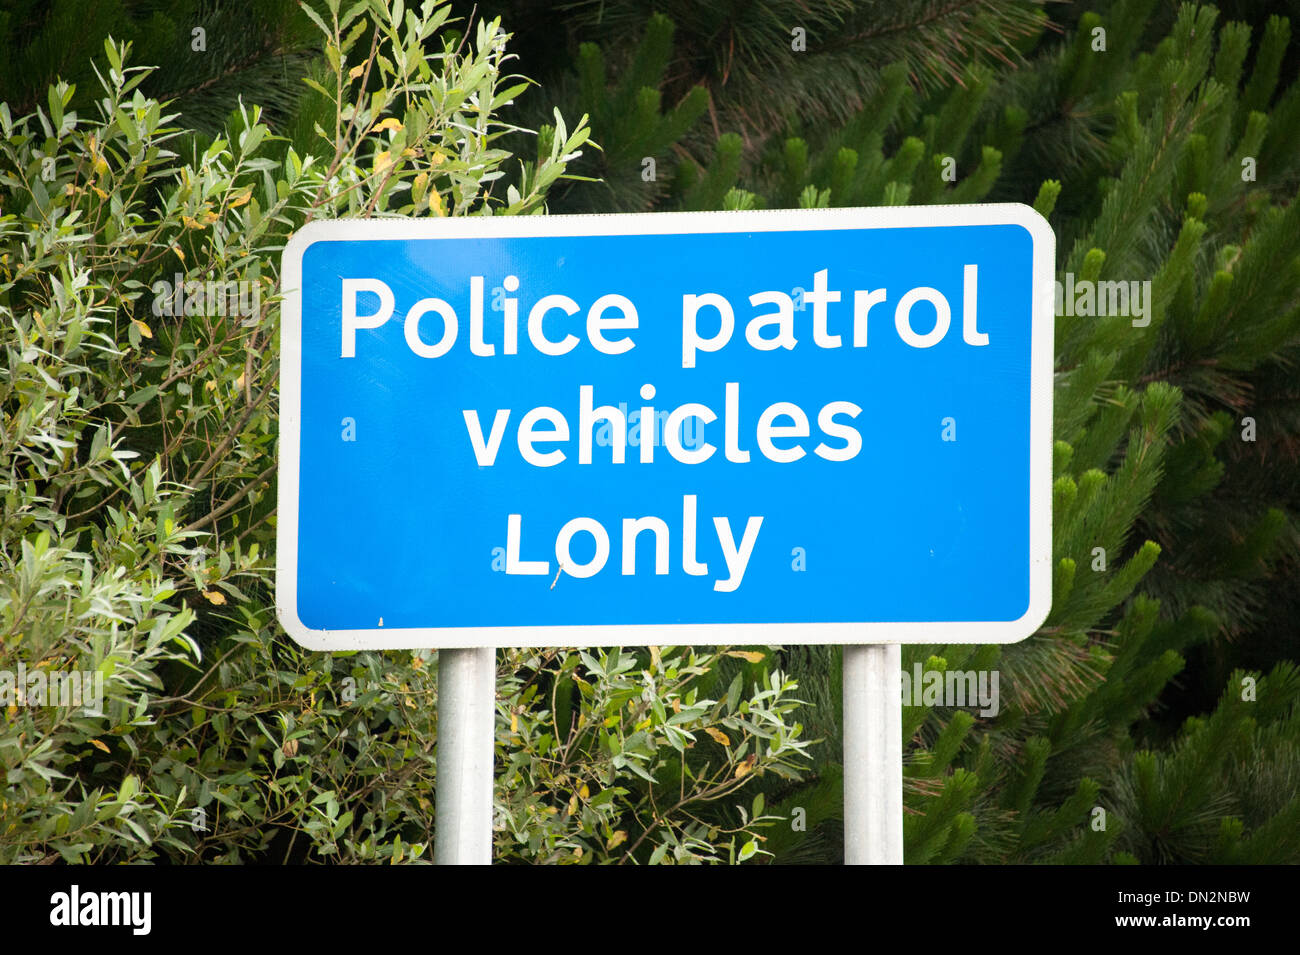 Police Patrol Vehicles Lonly Lonely Altered Sign Funny Stock Photo